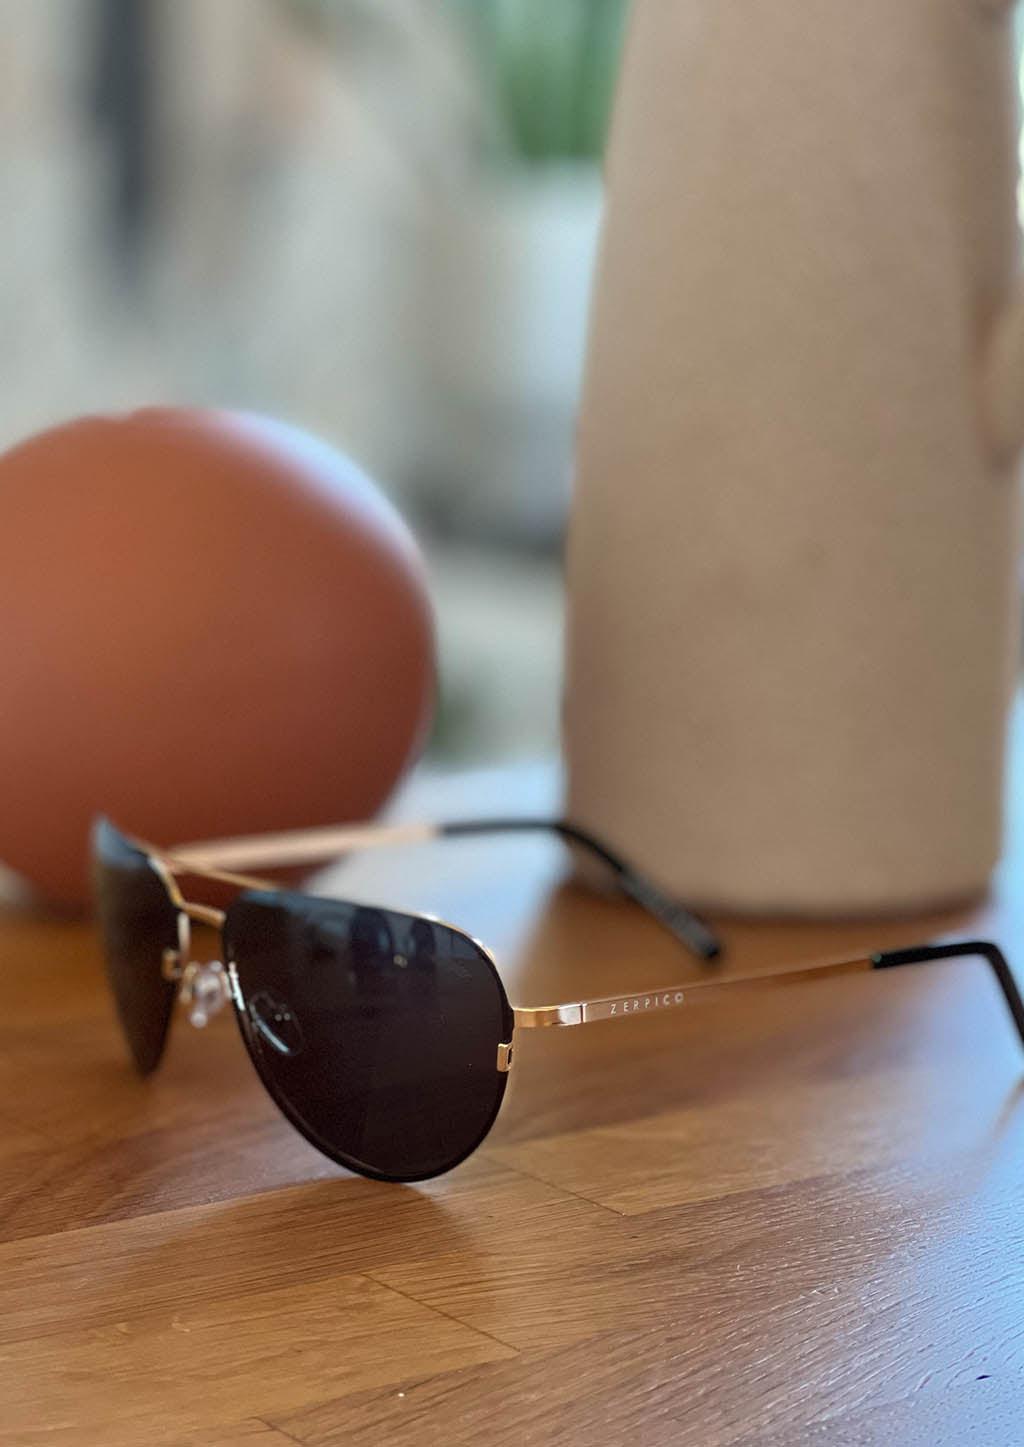 Titan - Titanium Aviator Sunglasses V2 - 24K Gold Plated with real gold. Photo taken in Swedish home.